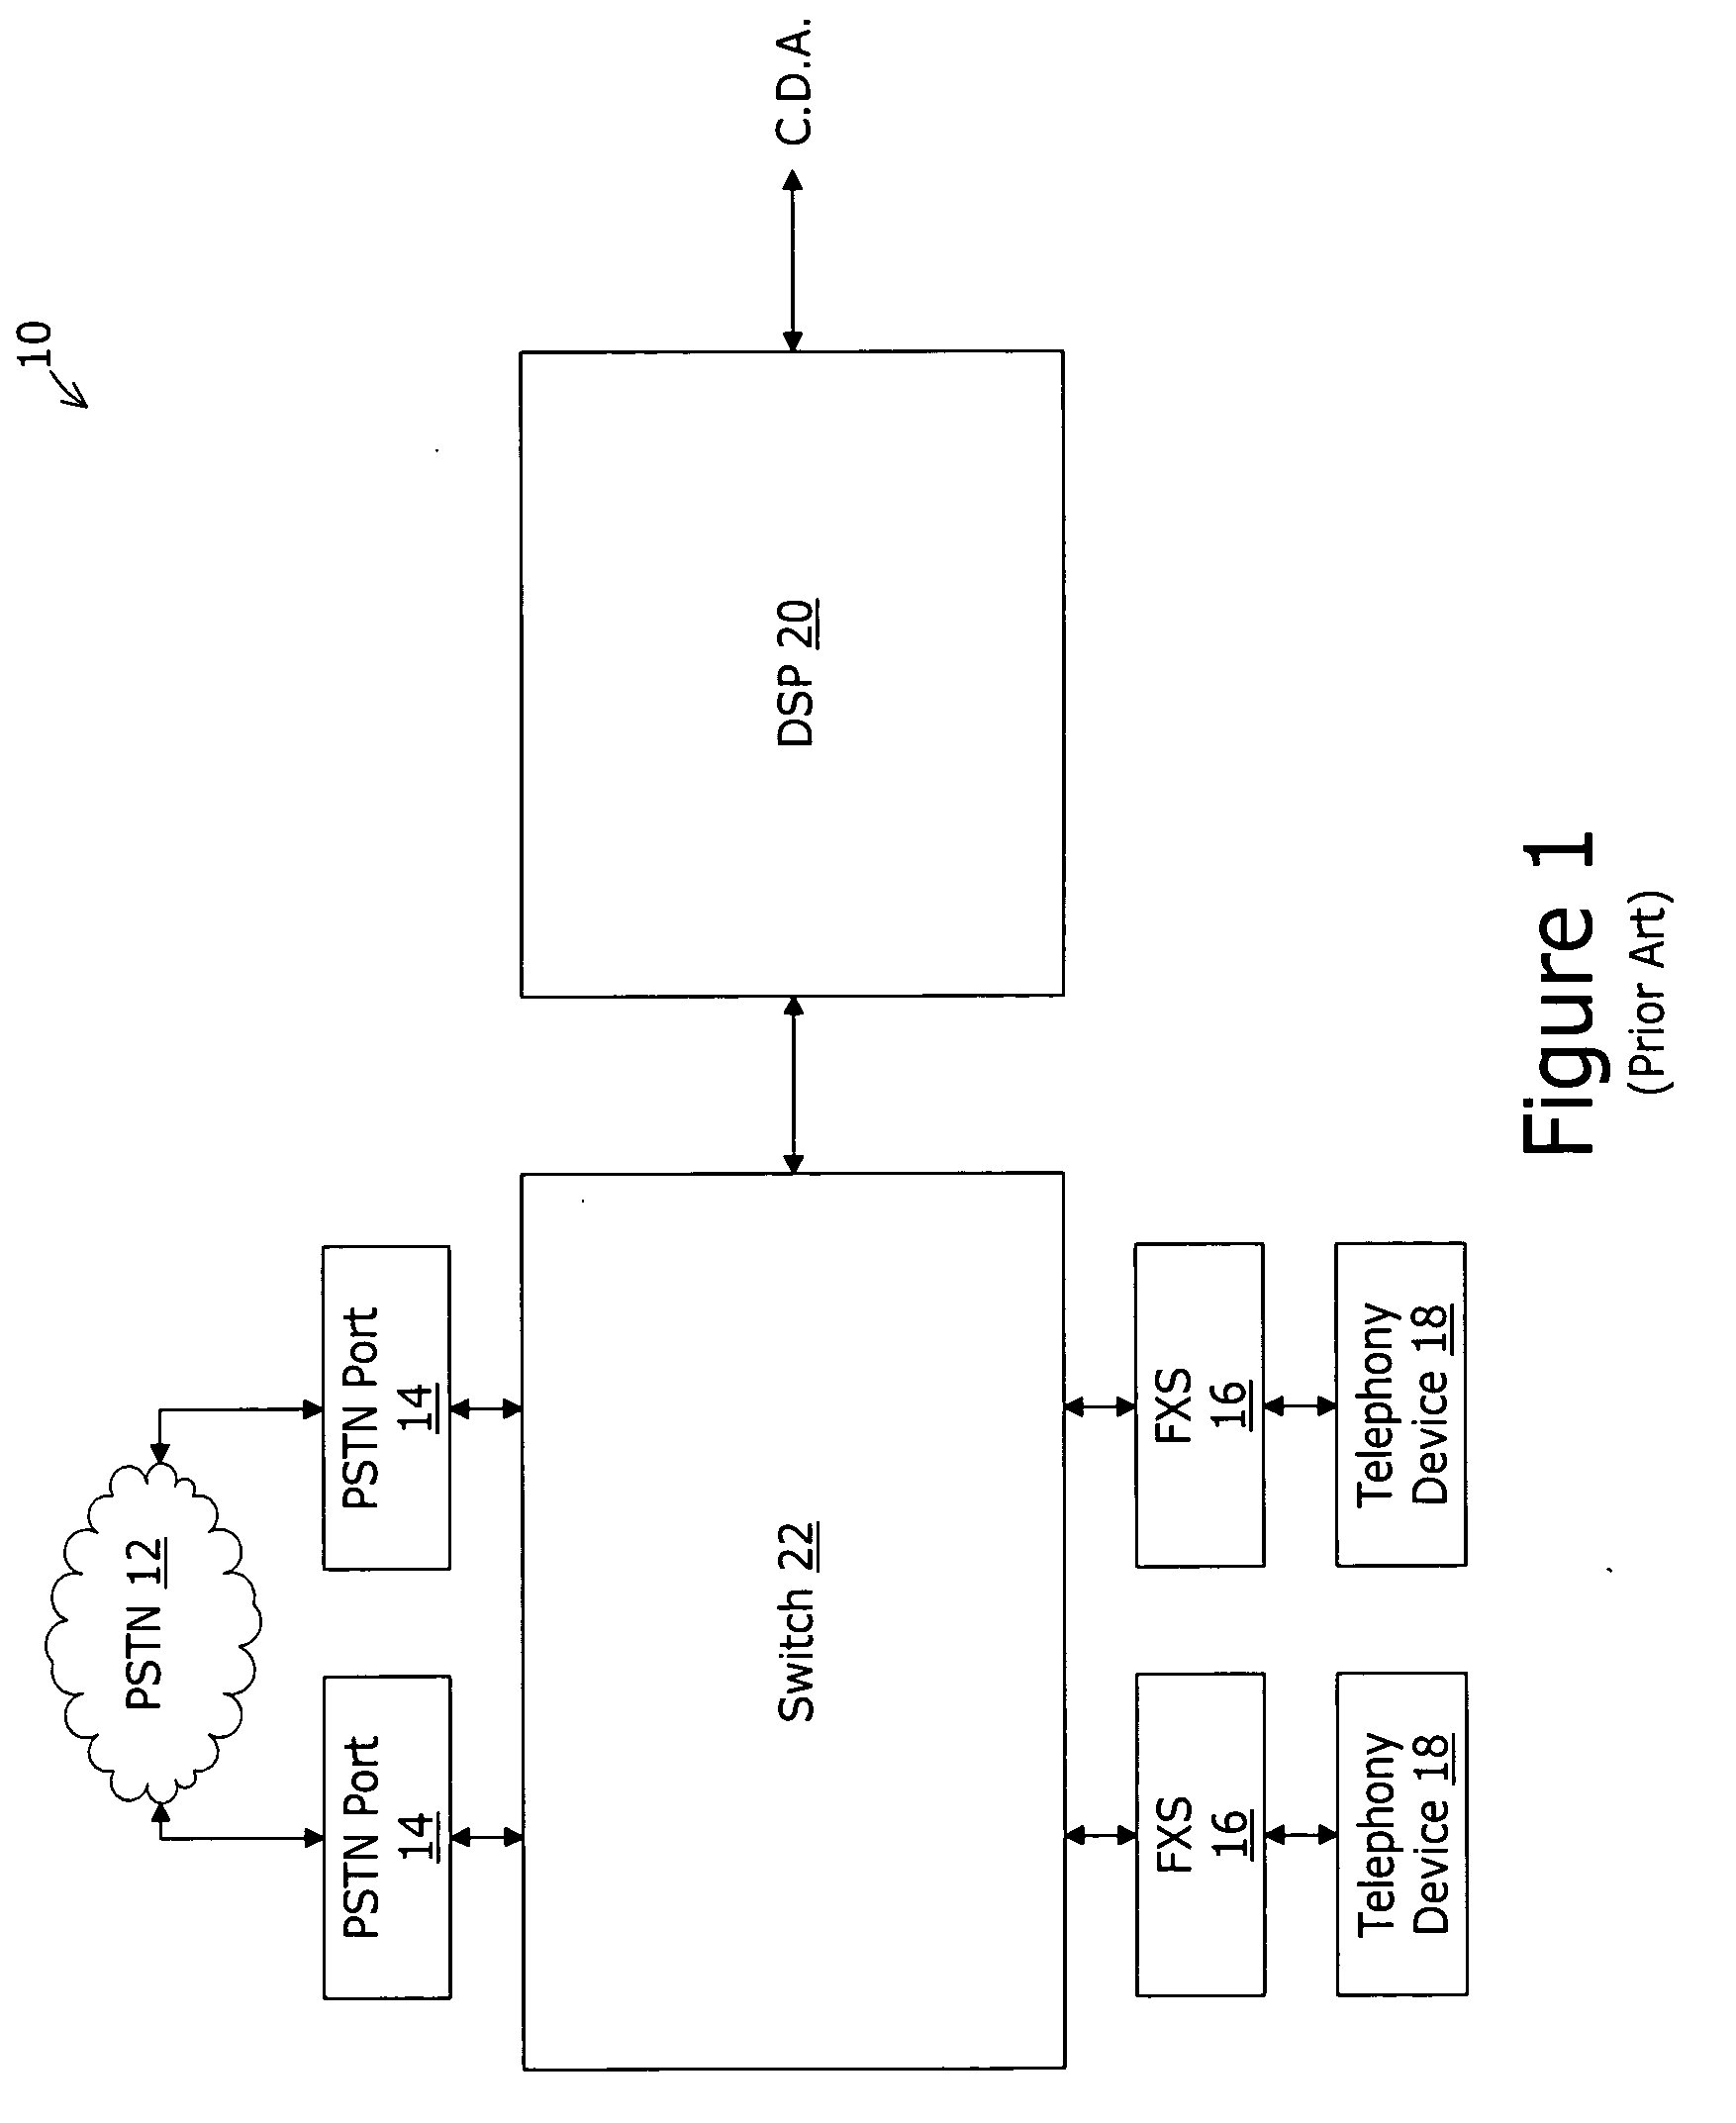 Packet media gateway with a secondary PSTN connection and method for time slot switching